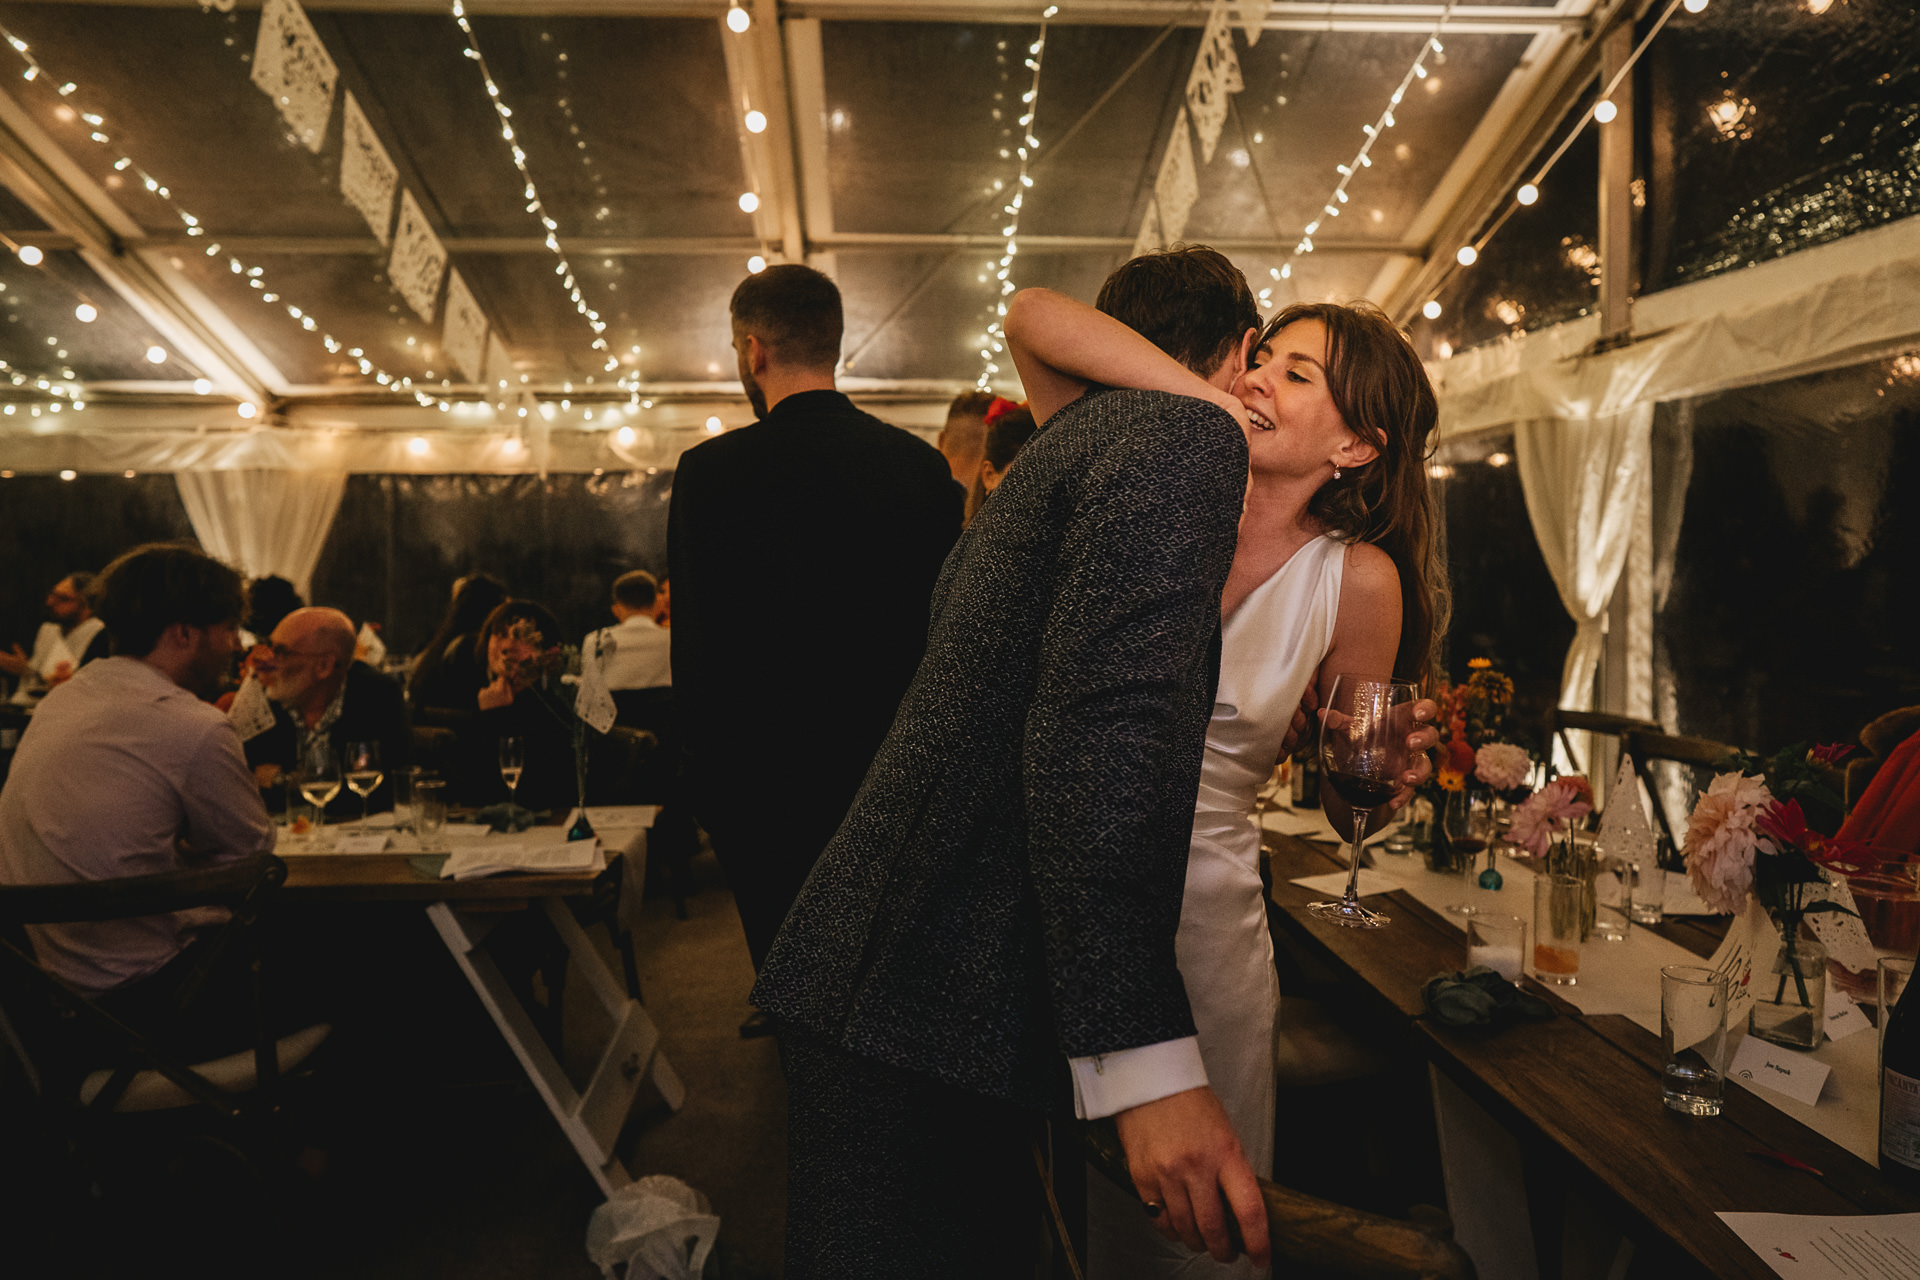 A bride hugging her groom in a marquee lit with fairy lights